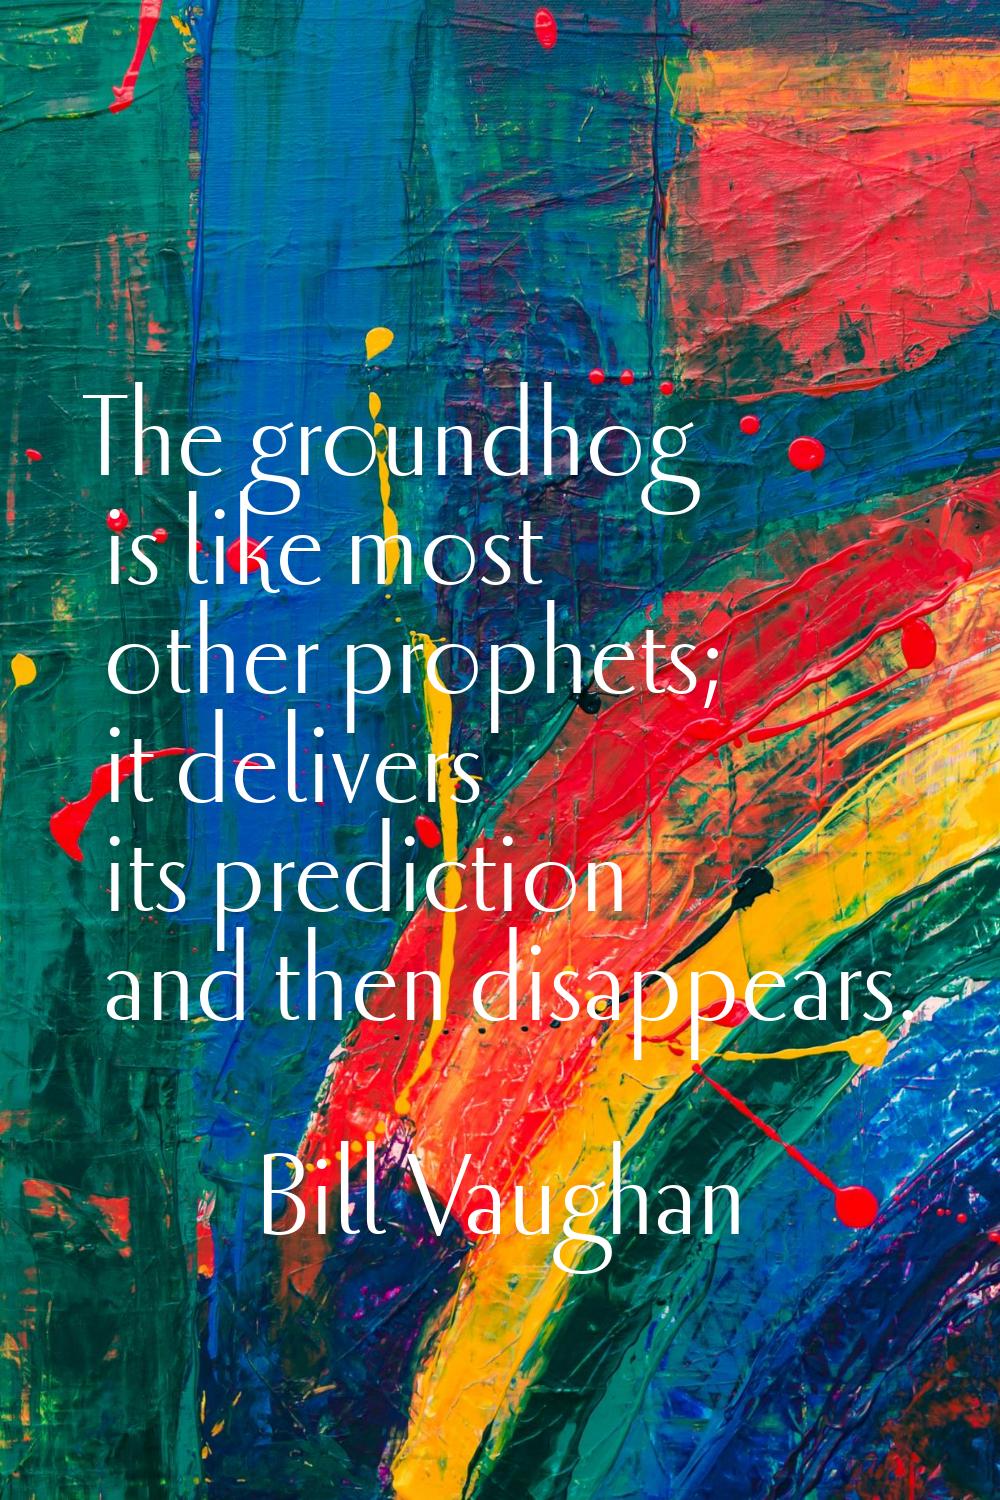 The groundhog is like most other prophets; it delivers its prediction and then disappears.